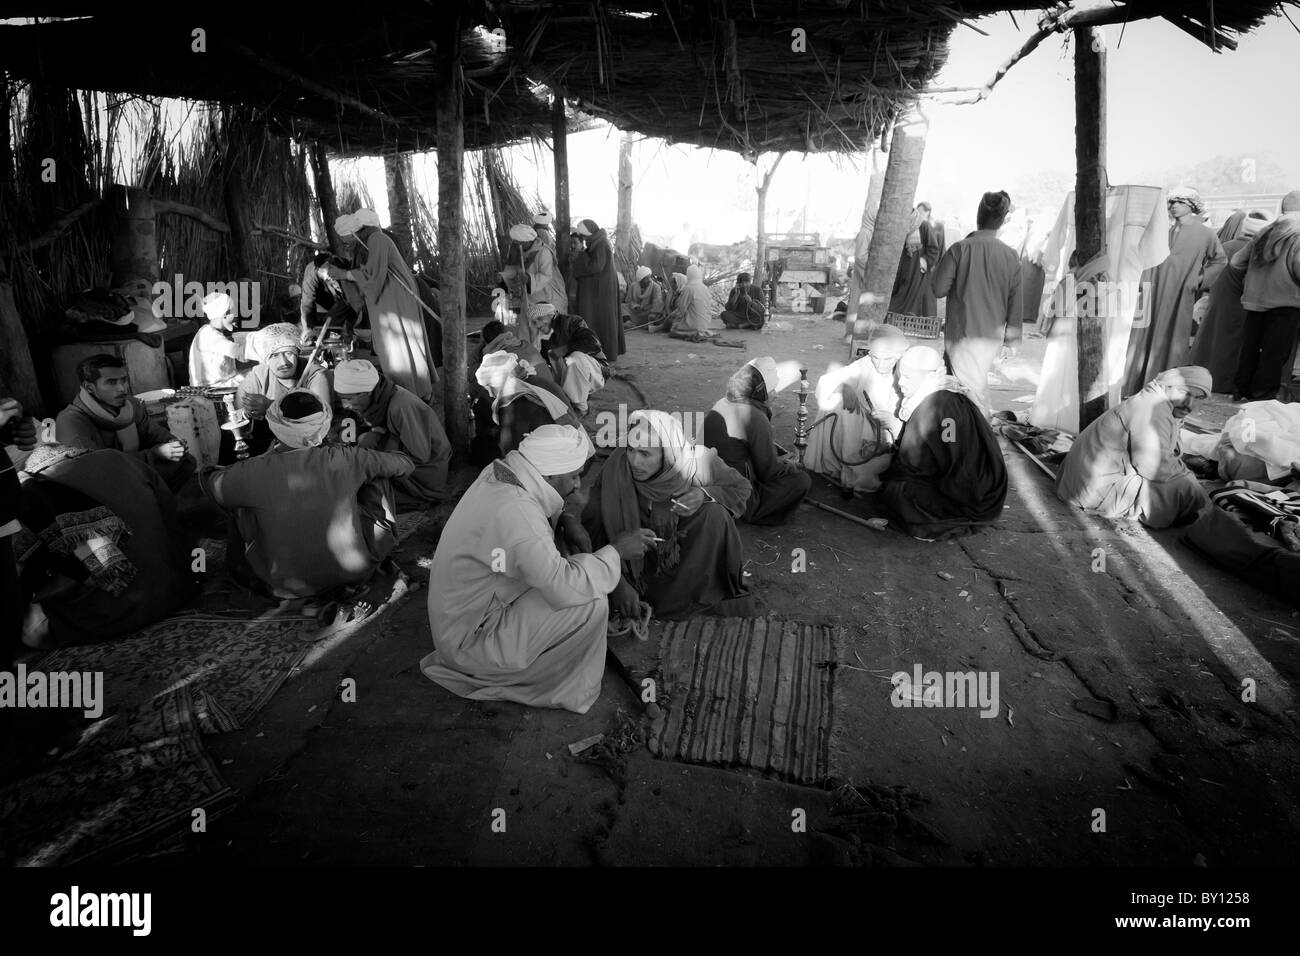 Black and white image of men relaxing, talking, smoking and tea drinking in a shelter at Luxor Camel Market Egypt Africa Stock Photo